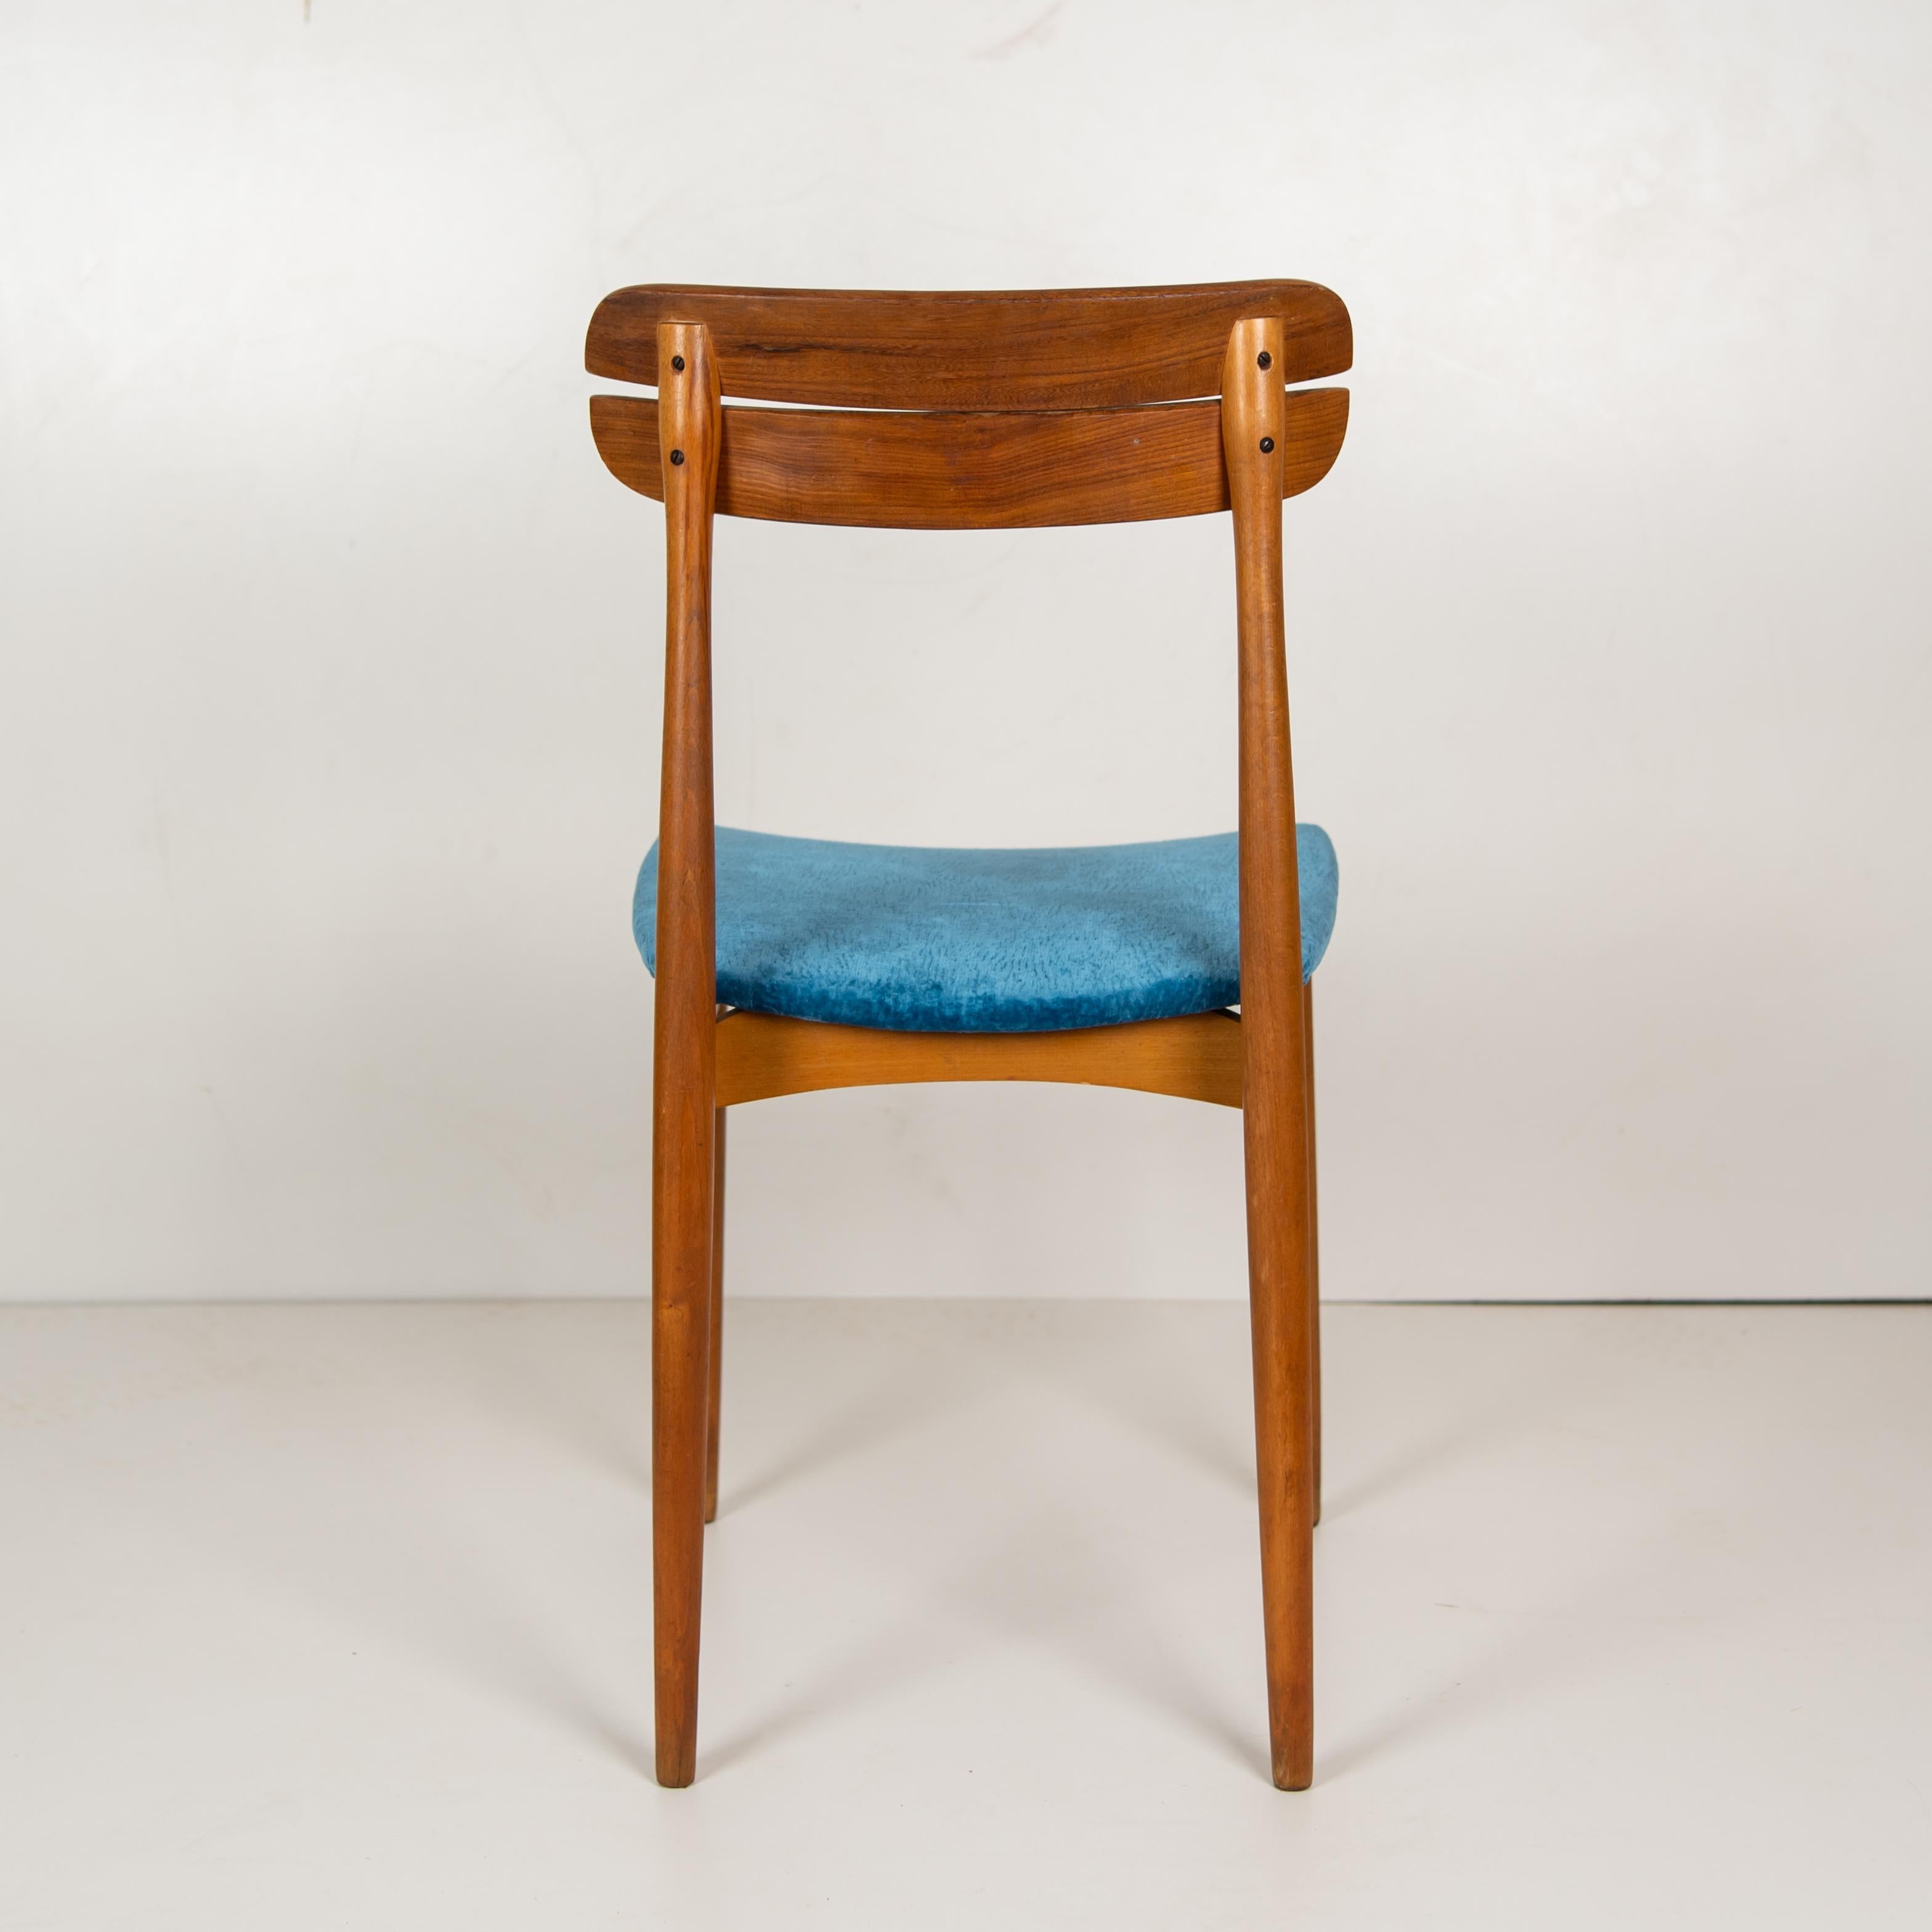 Mid-20th Century Vintage scandinavian Chairs, Velvet and wood 1950s